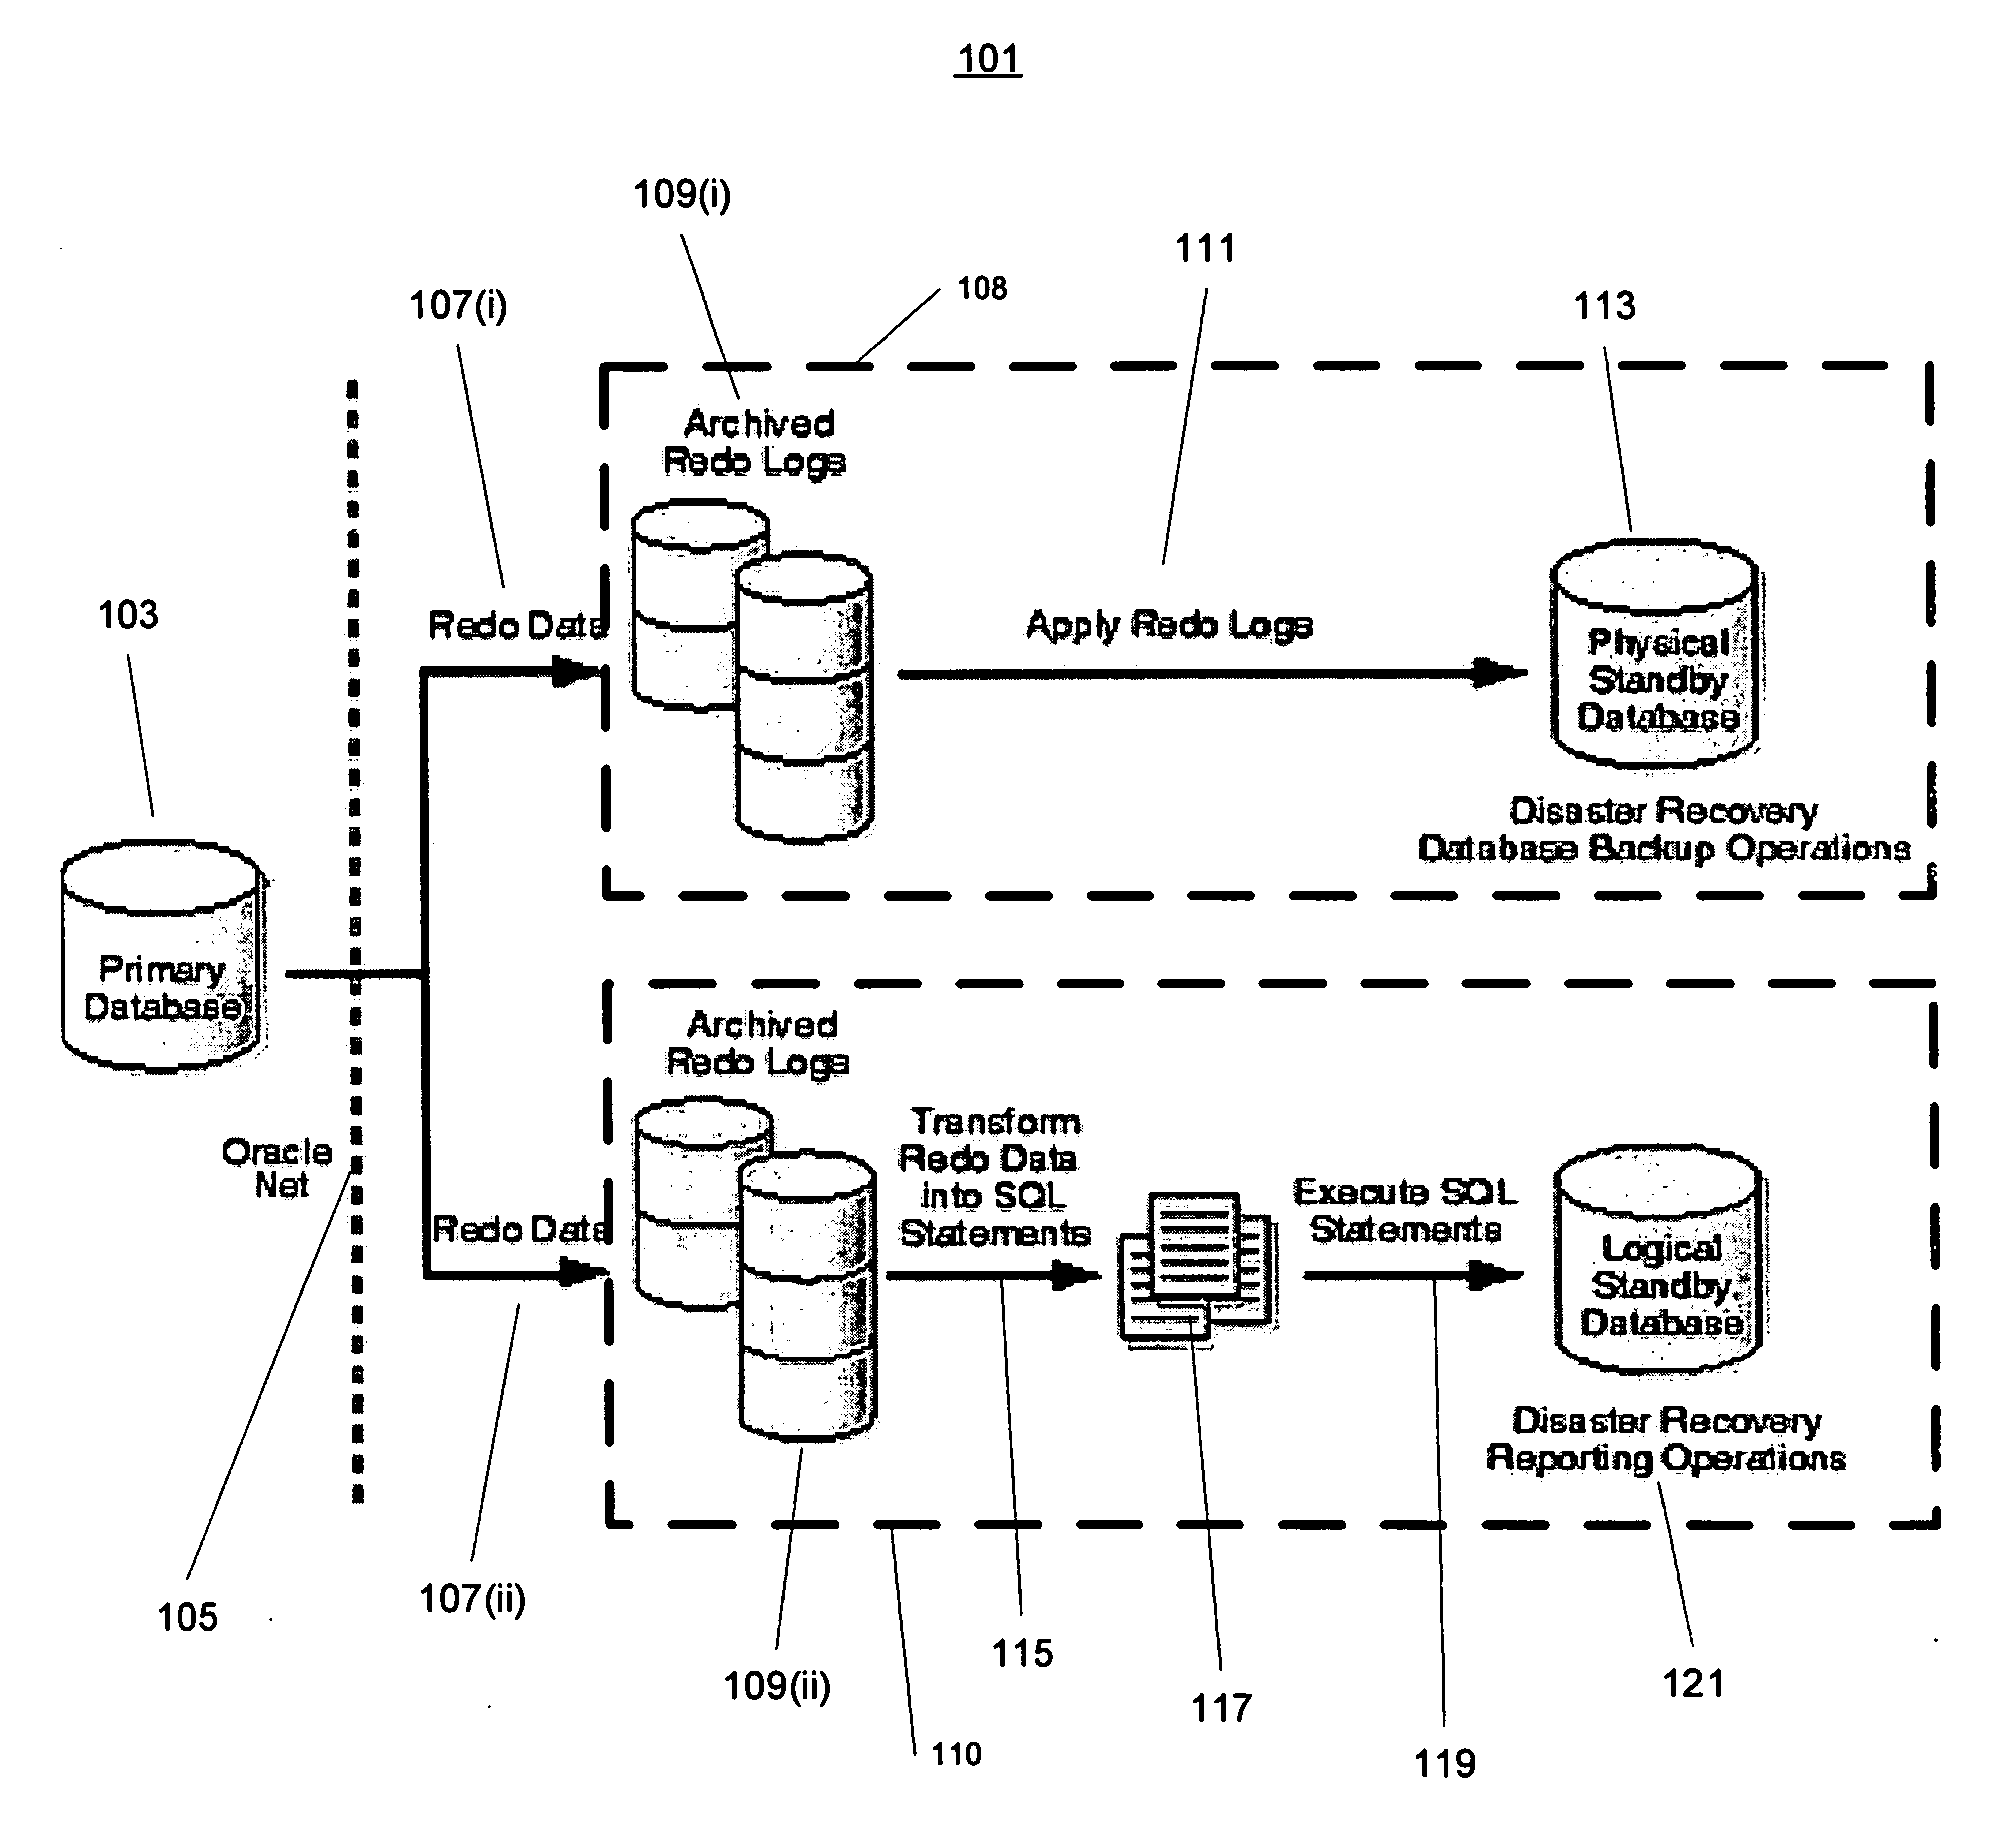 System and method of configuring a database system with replicated data and automatic failover and recovery